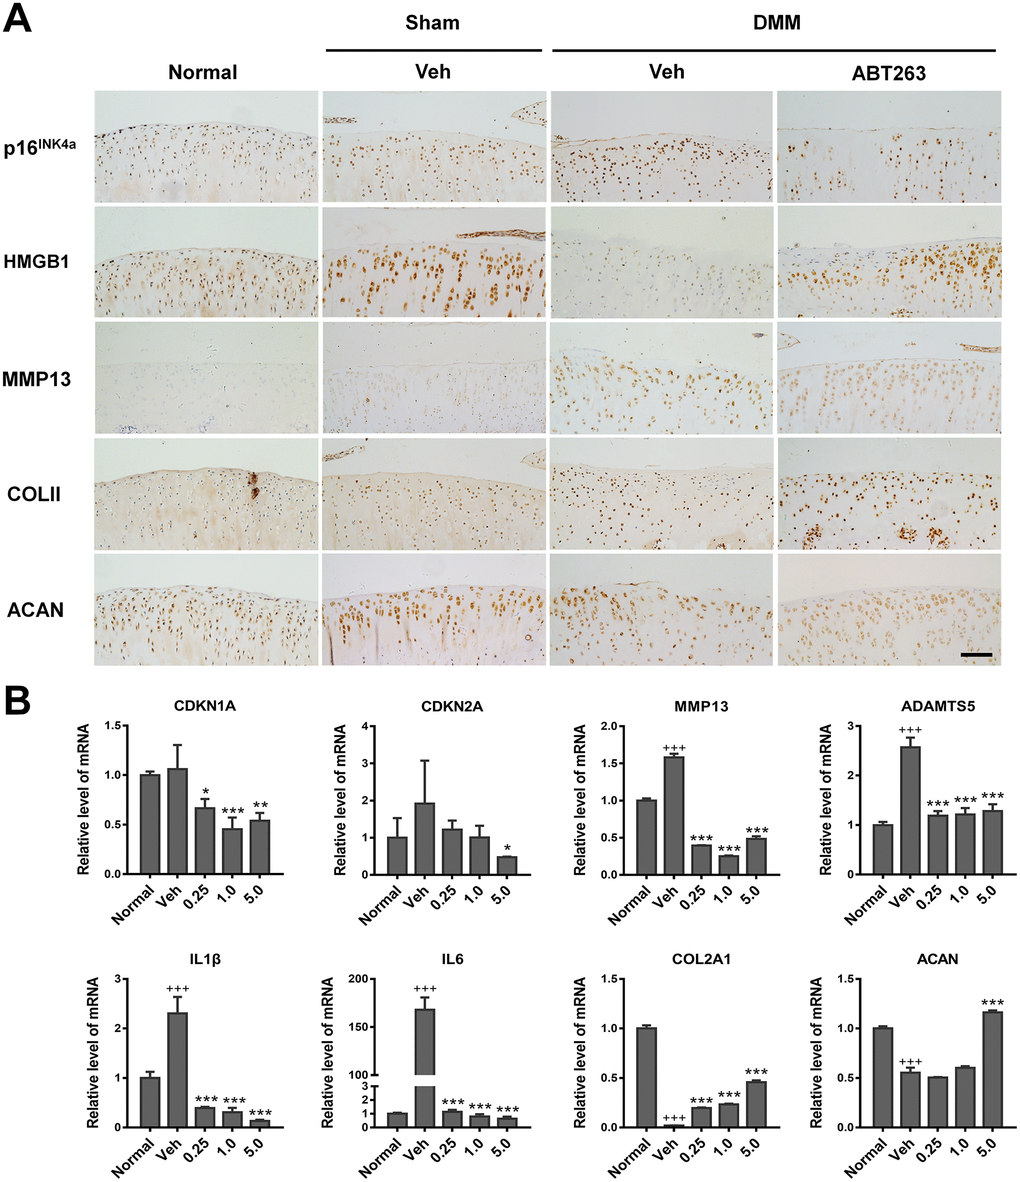 Elimination of SnCs by ABT263 and alleviation inflammatory microenvironment in vivo. (A) immunohistochemical analysis for expression of p16INK4a, HMGB1, COLII and ACAN of rat cartilage after 2 weeks intra-articular injection of ABT263. Result from ABT263 of 1.0 mM was presented. Scale bar: 100 μm. (B) mRNA level analysis using real-time qPCR for CDKN1A, CDKN2A, MMP13, ADAMTS5, IL1β, IL6, COLII and ACAN in the rat knee joint. Data are shown as mean ± standard deviation. N = 3 per group. +p